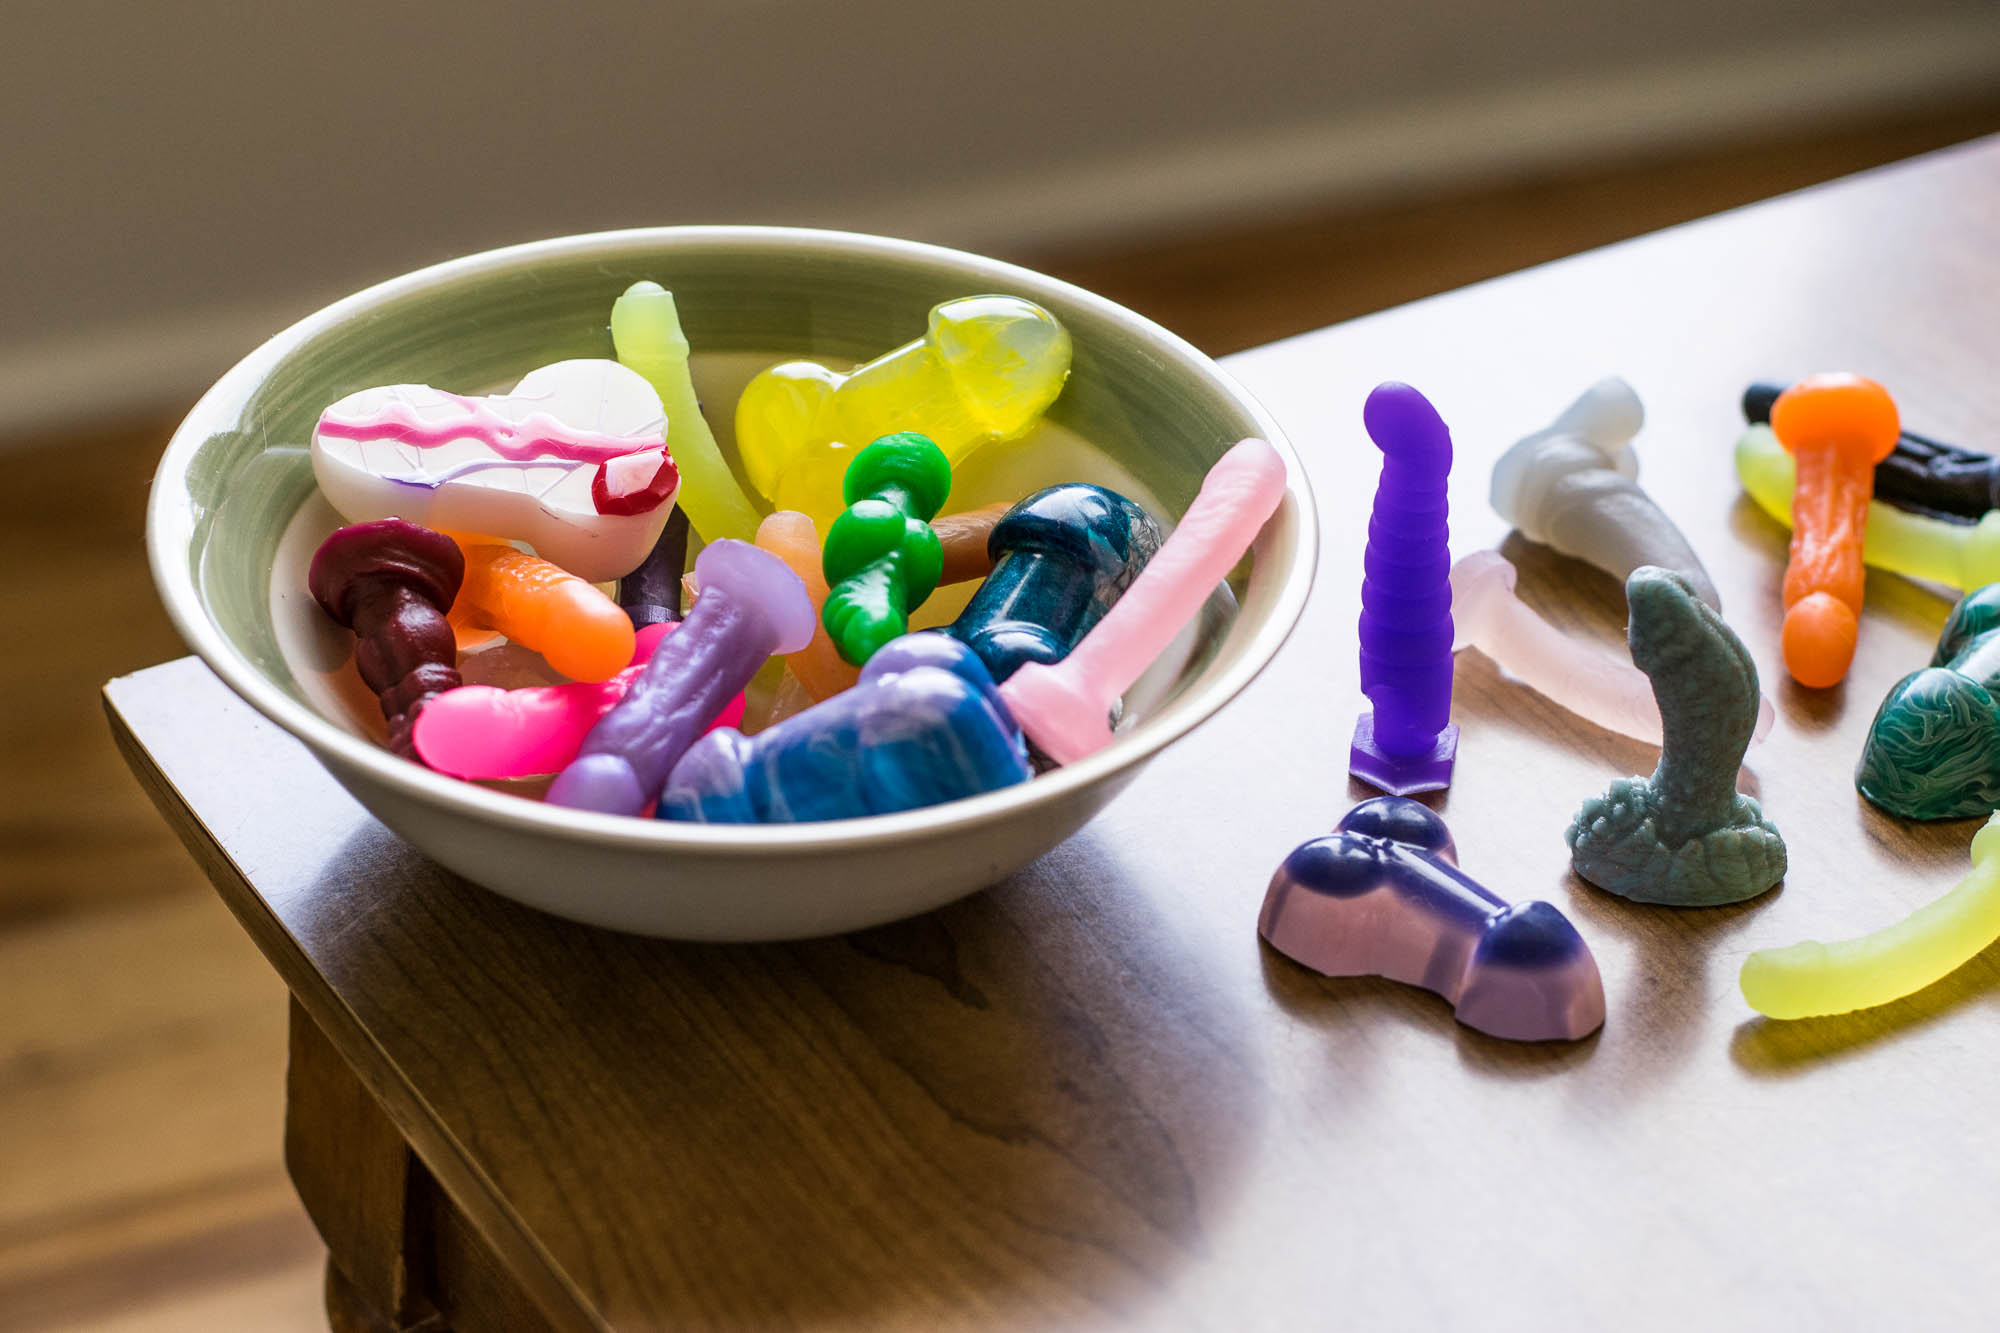 Tiny dildos from Vamp, Tantus, Bad Dragon and Fun Factory in a bowl and on a table.